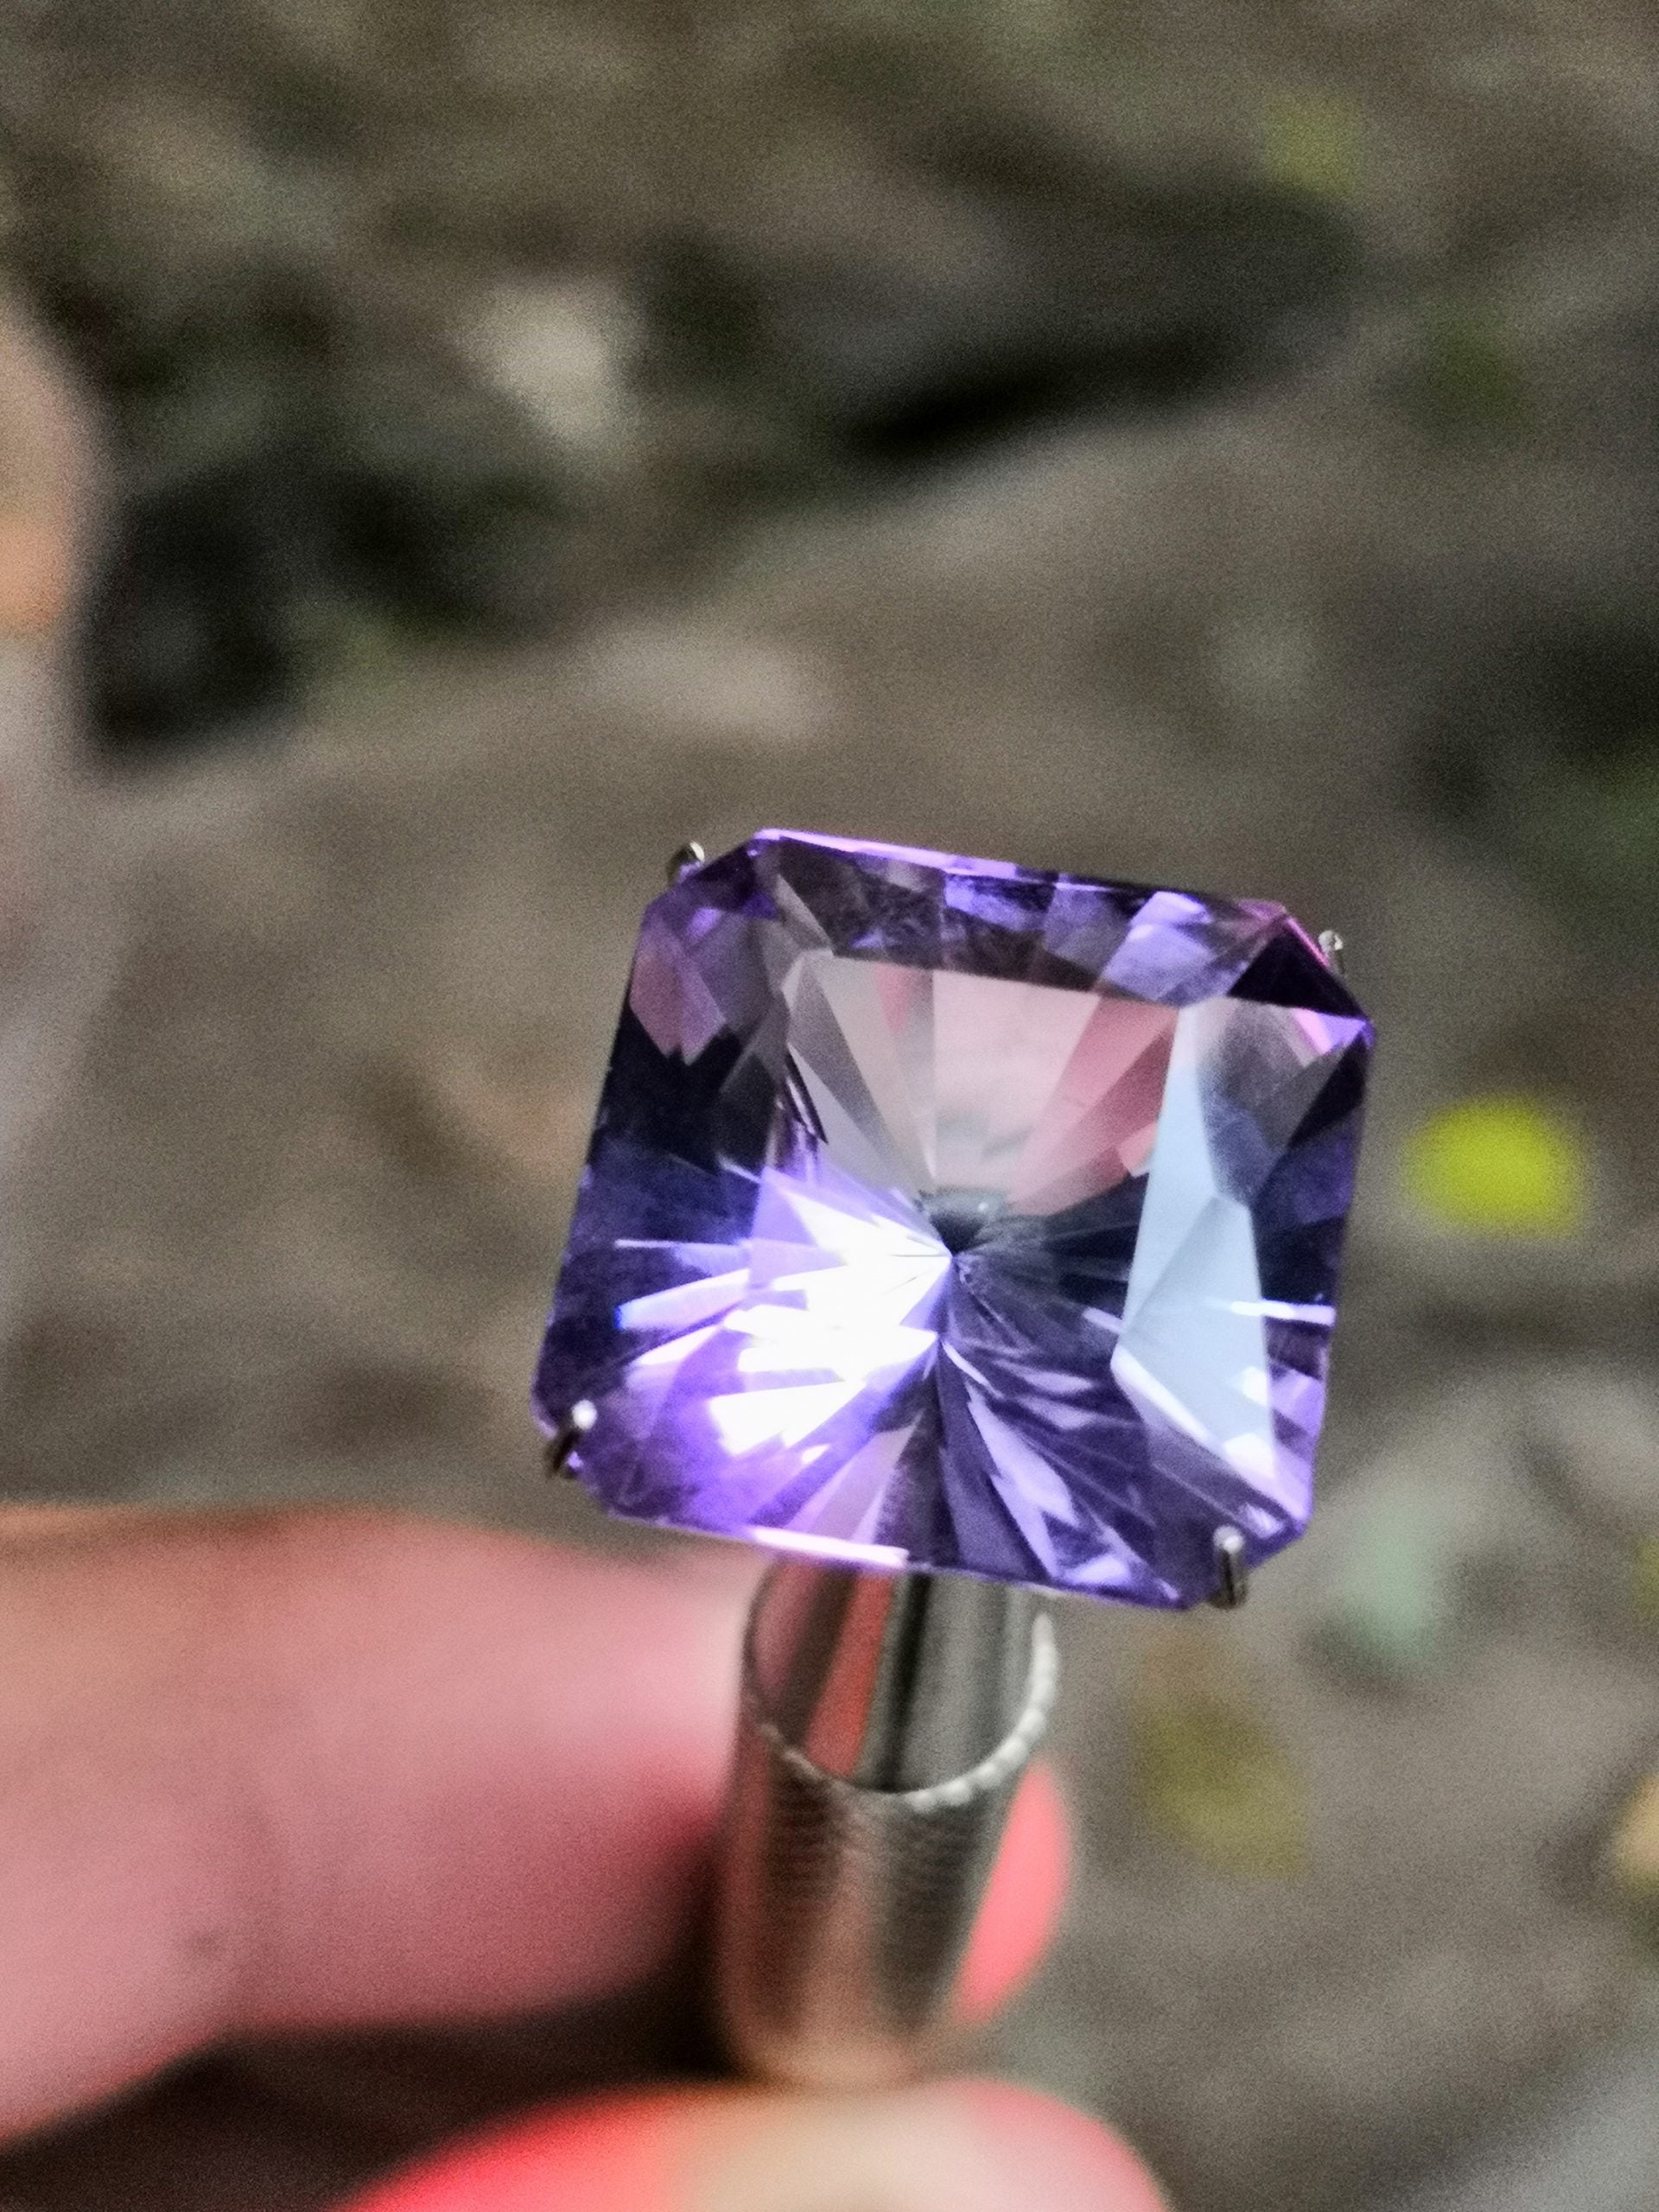 Super quality Faceted amethyst for sale